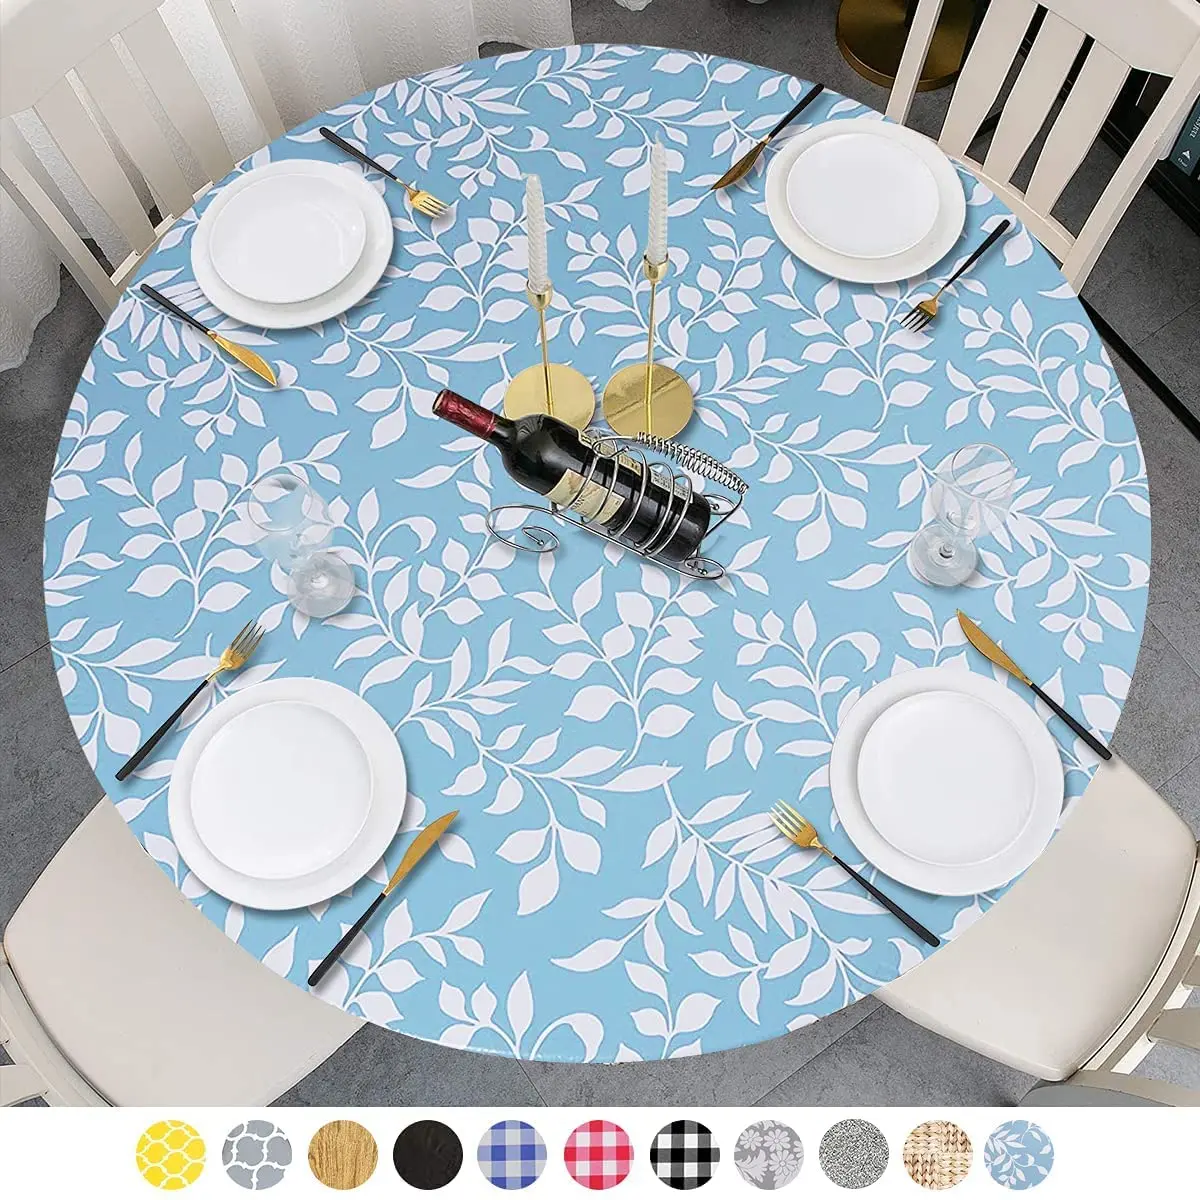 Fitted Round Plastic Vinyl Table Cloth Flannel Backing Elastic Edge Waterproof Table Protector for Dining Room Table Cover